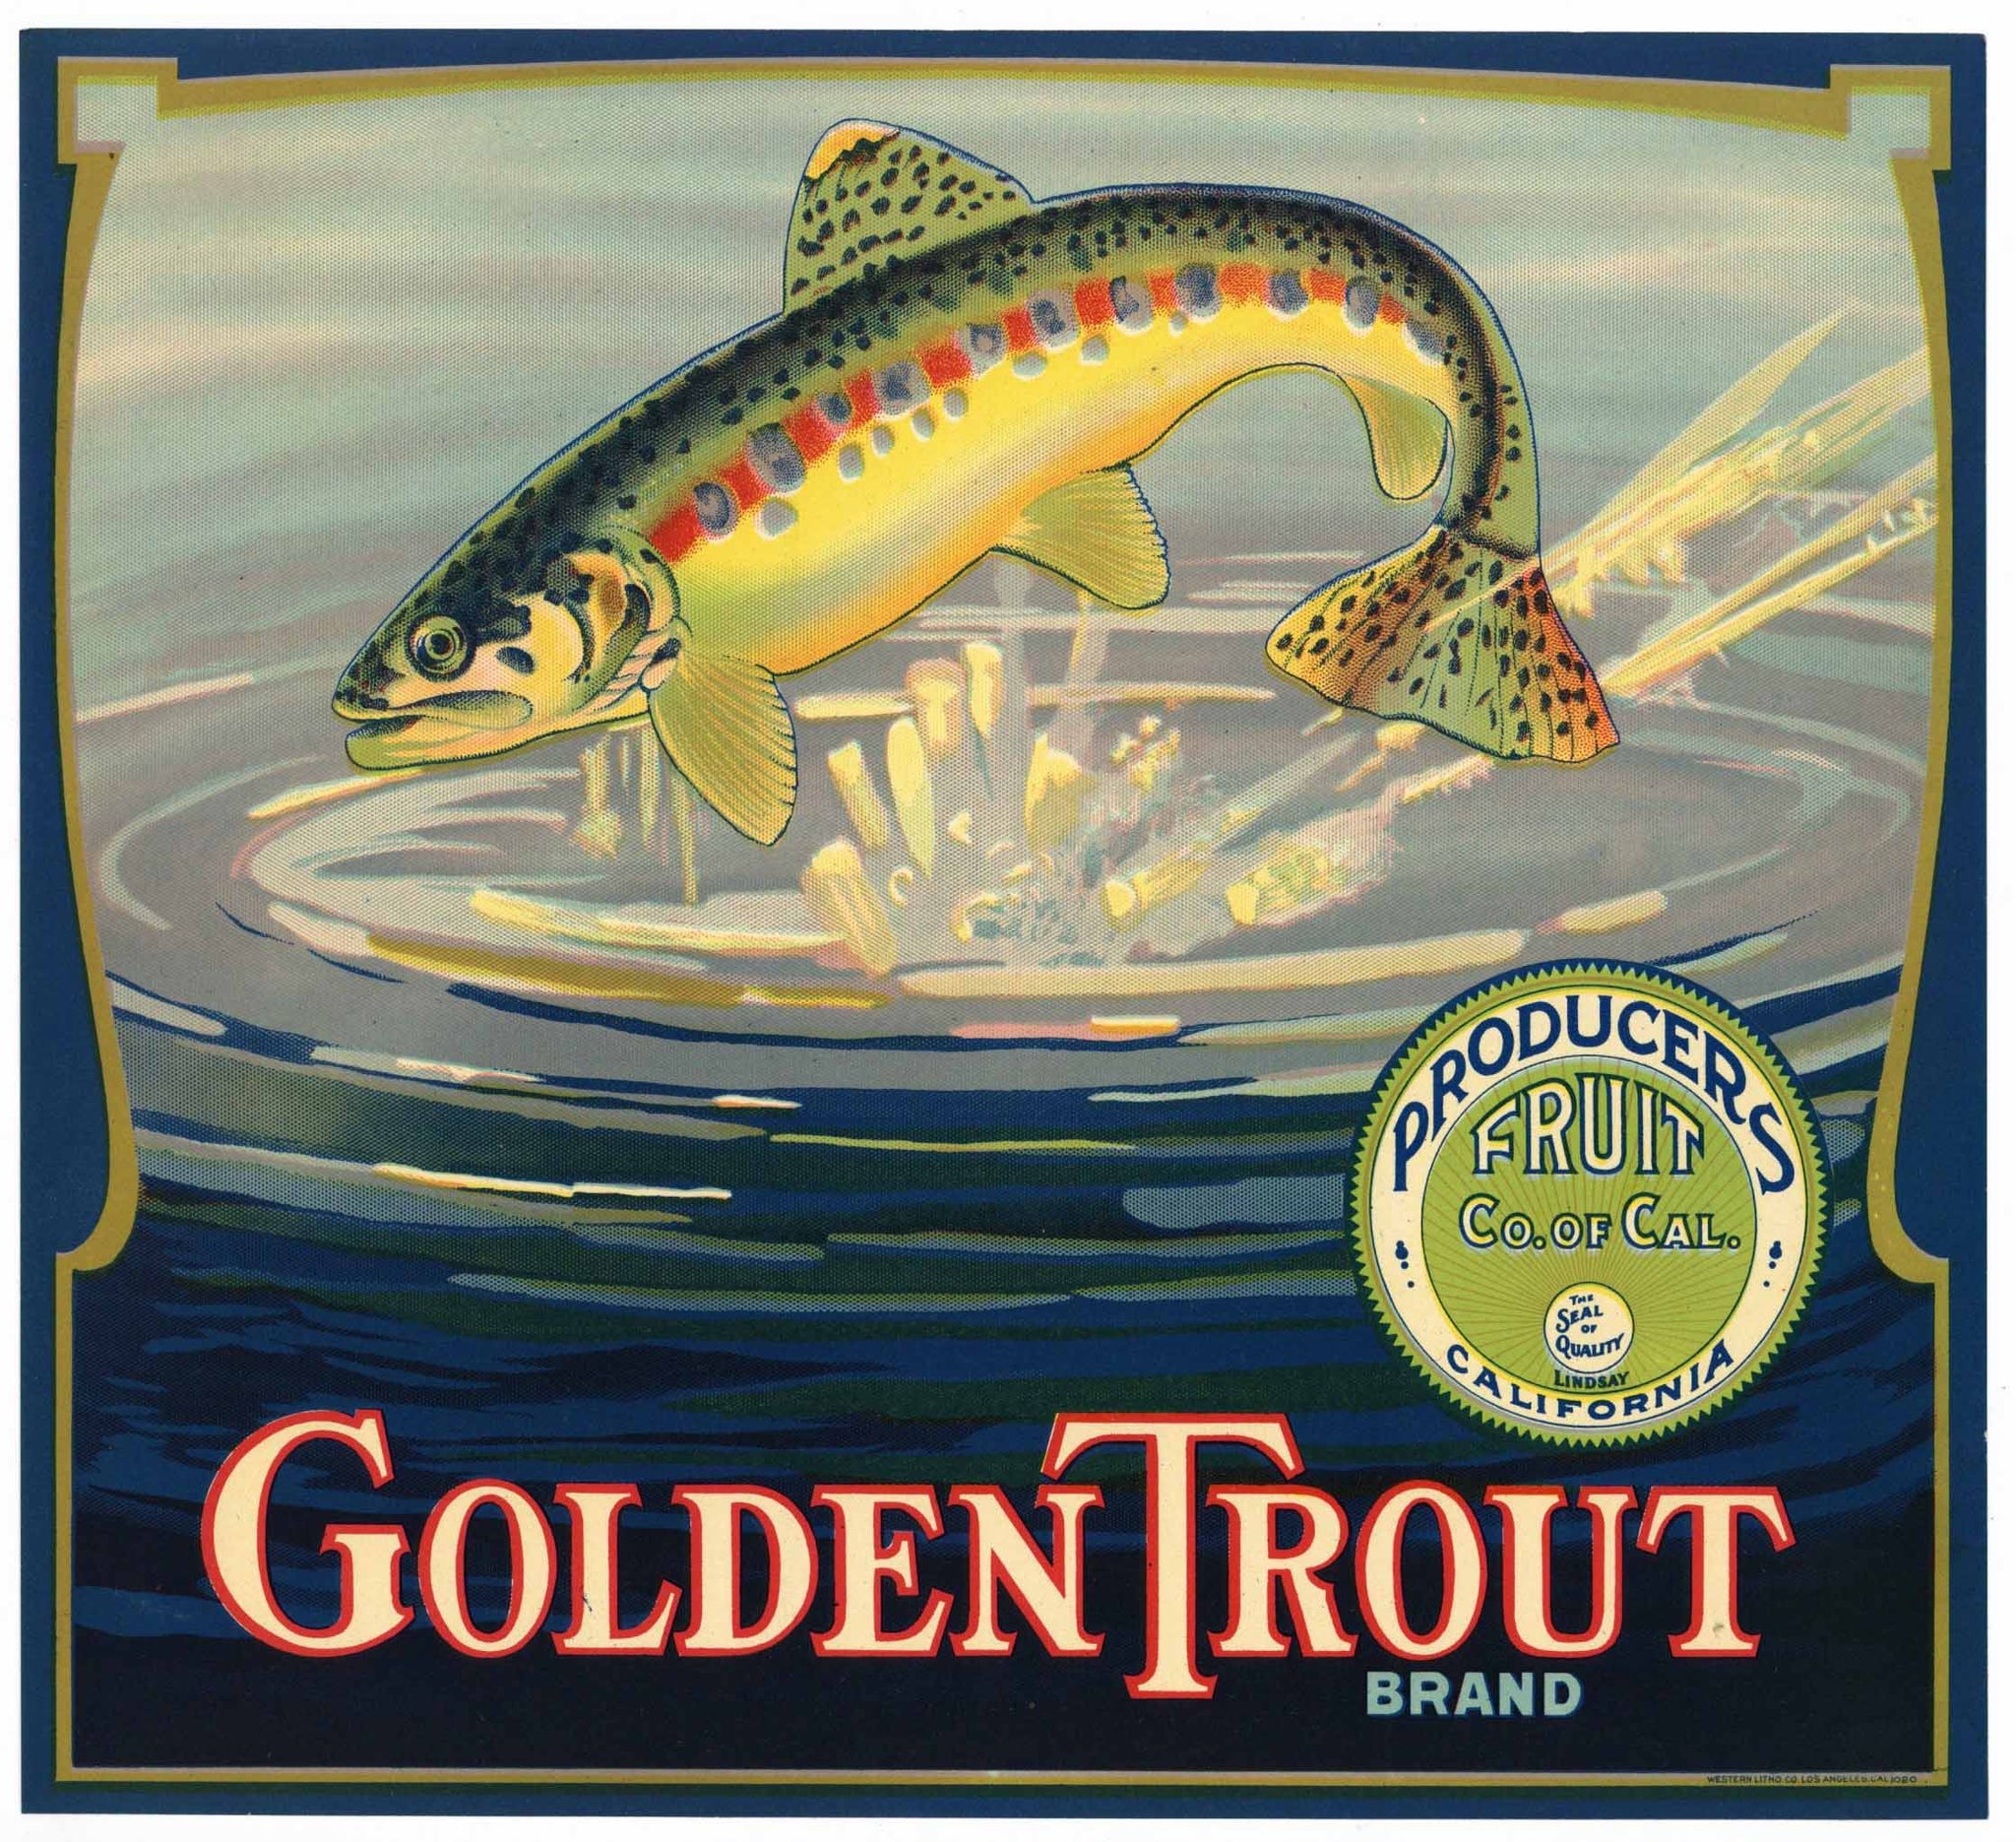 Golden Trout Brand Vintage Tulare County Orange Crate Label, Producers Fruit